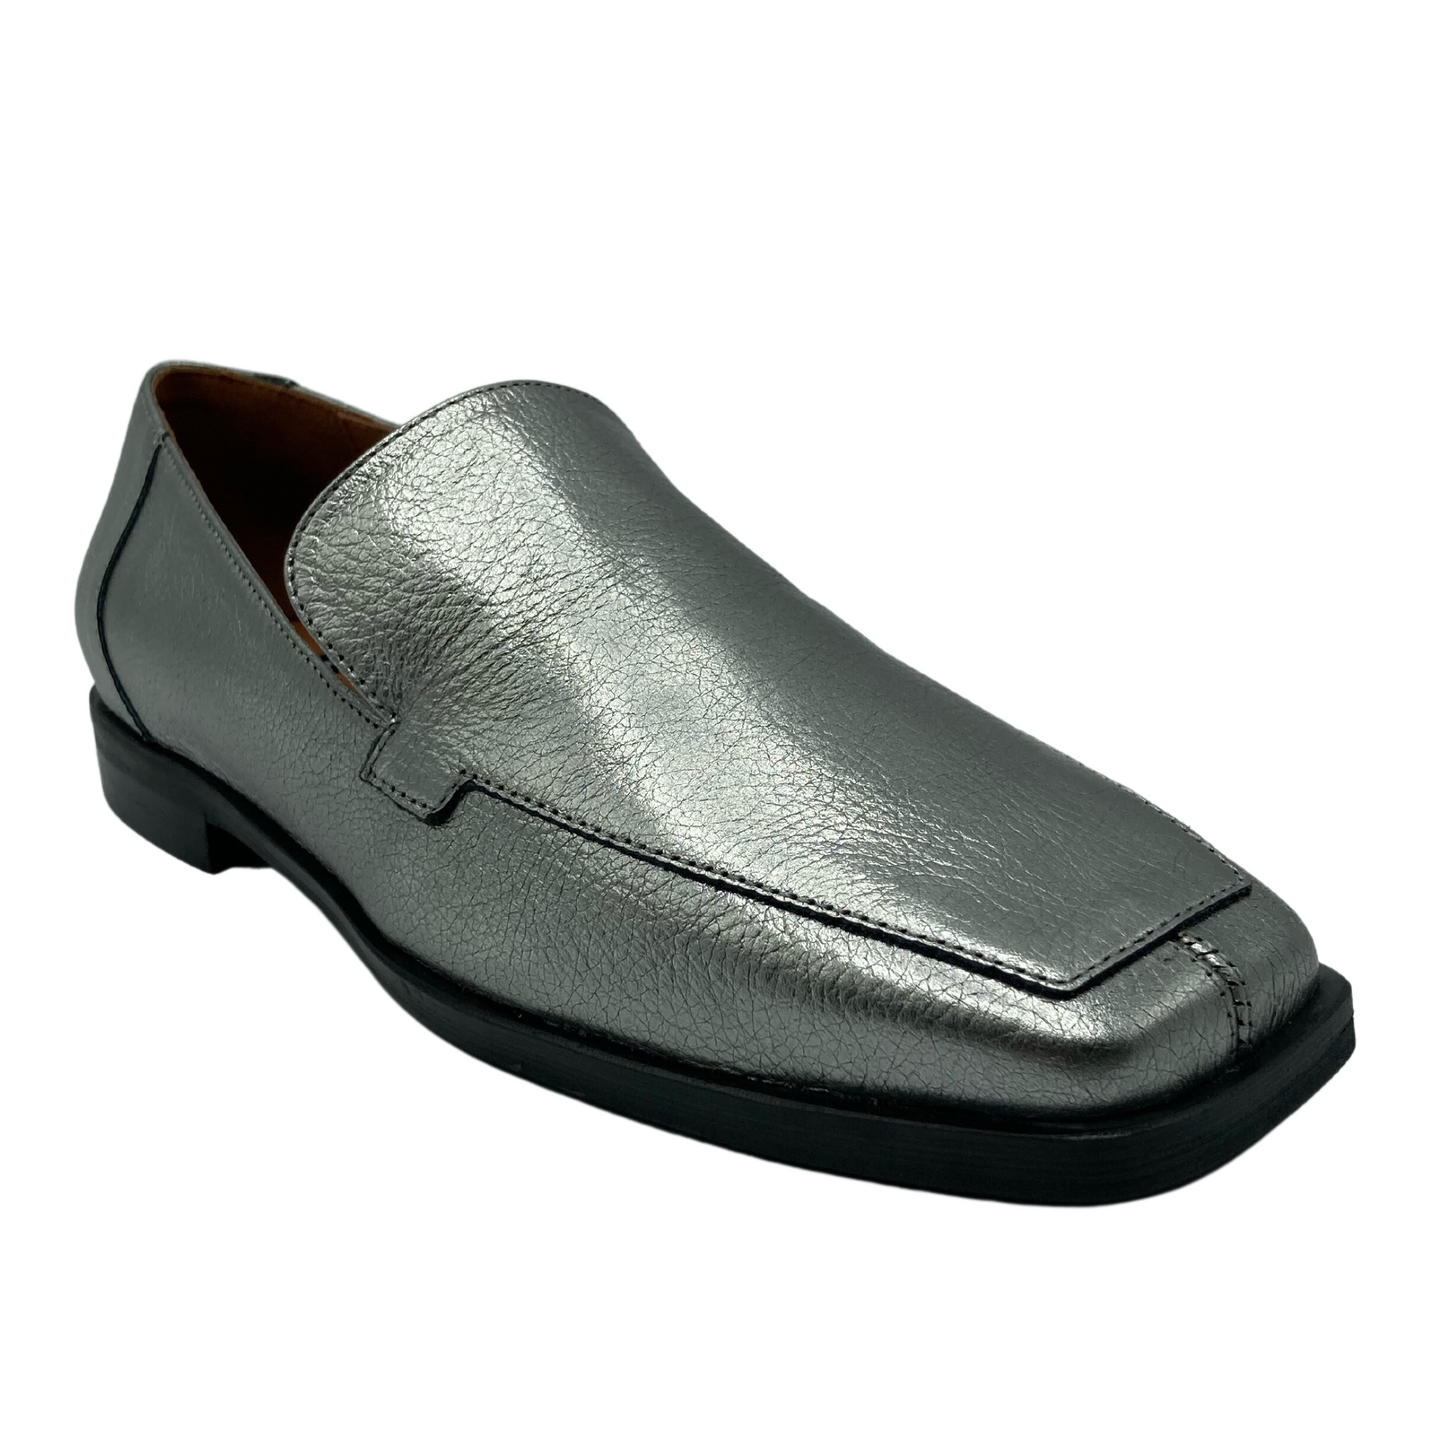 45 degree angled view of silver leather loafer with square toe and black outsole with leather lining